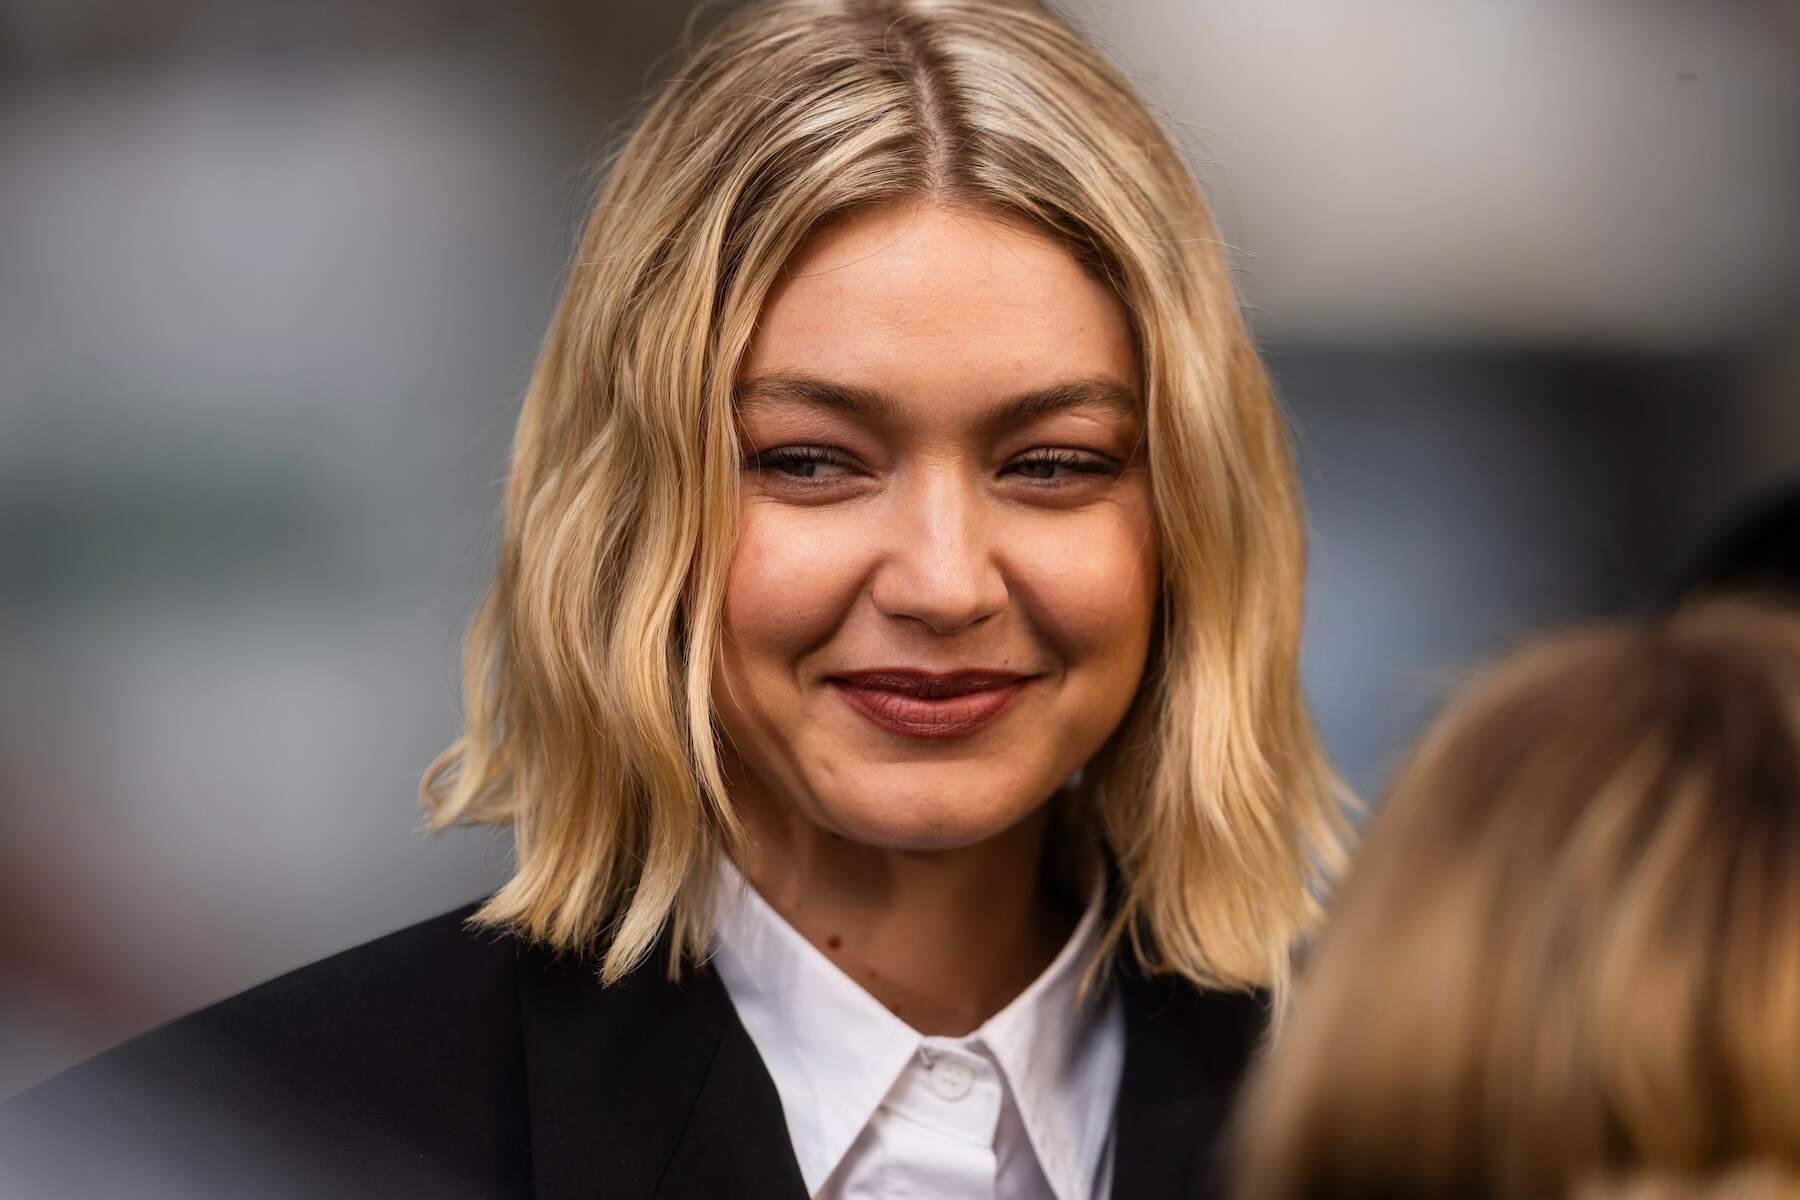 Model Gigi Hadid smiles in between takes during a Maybelline photoshoot